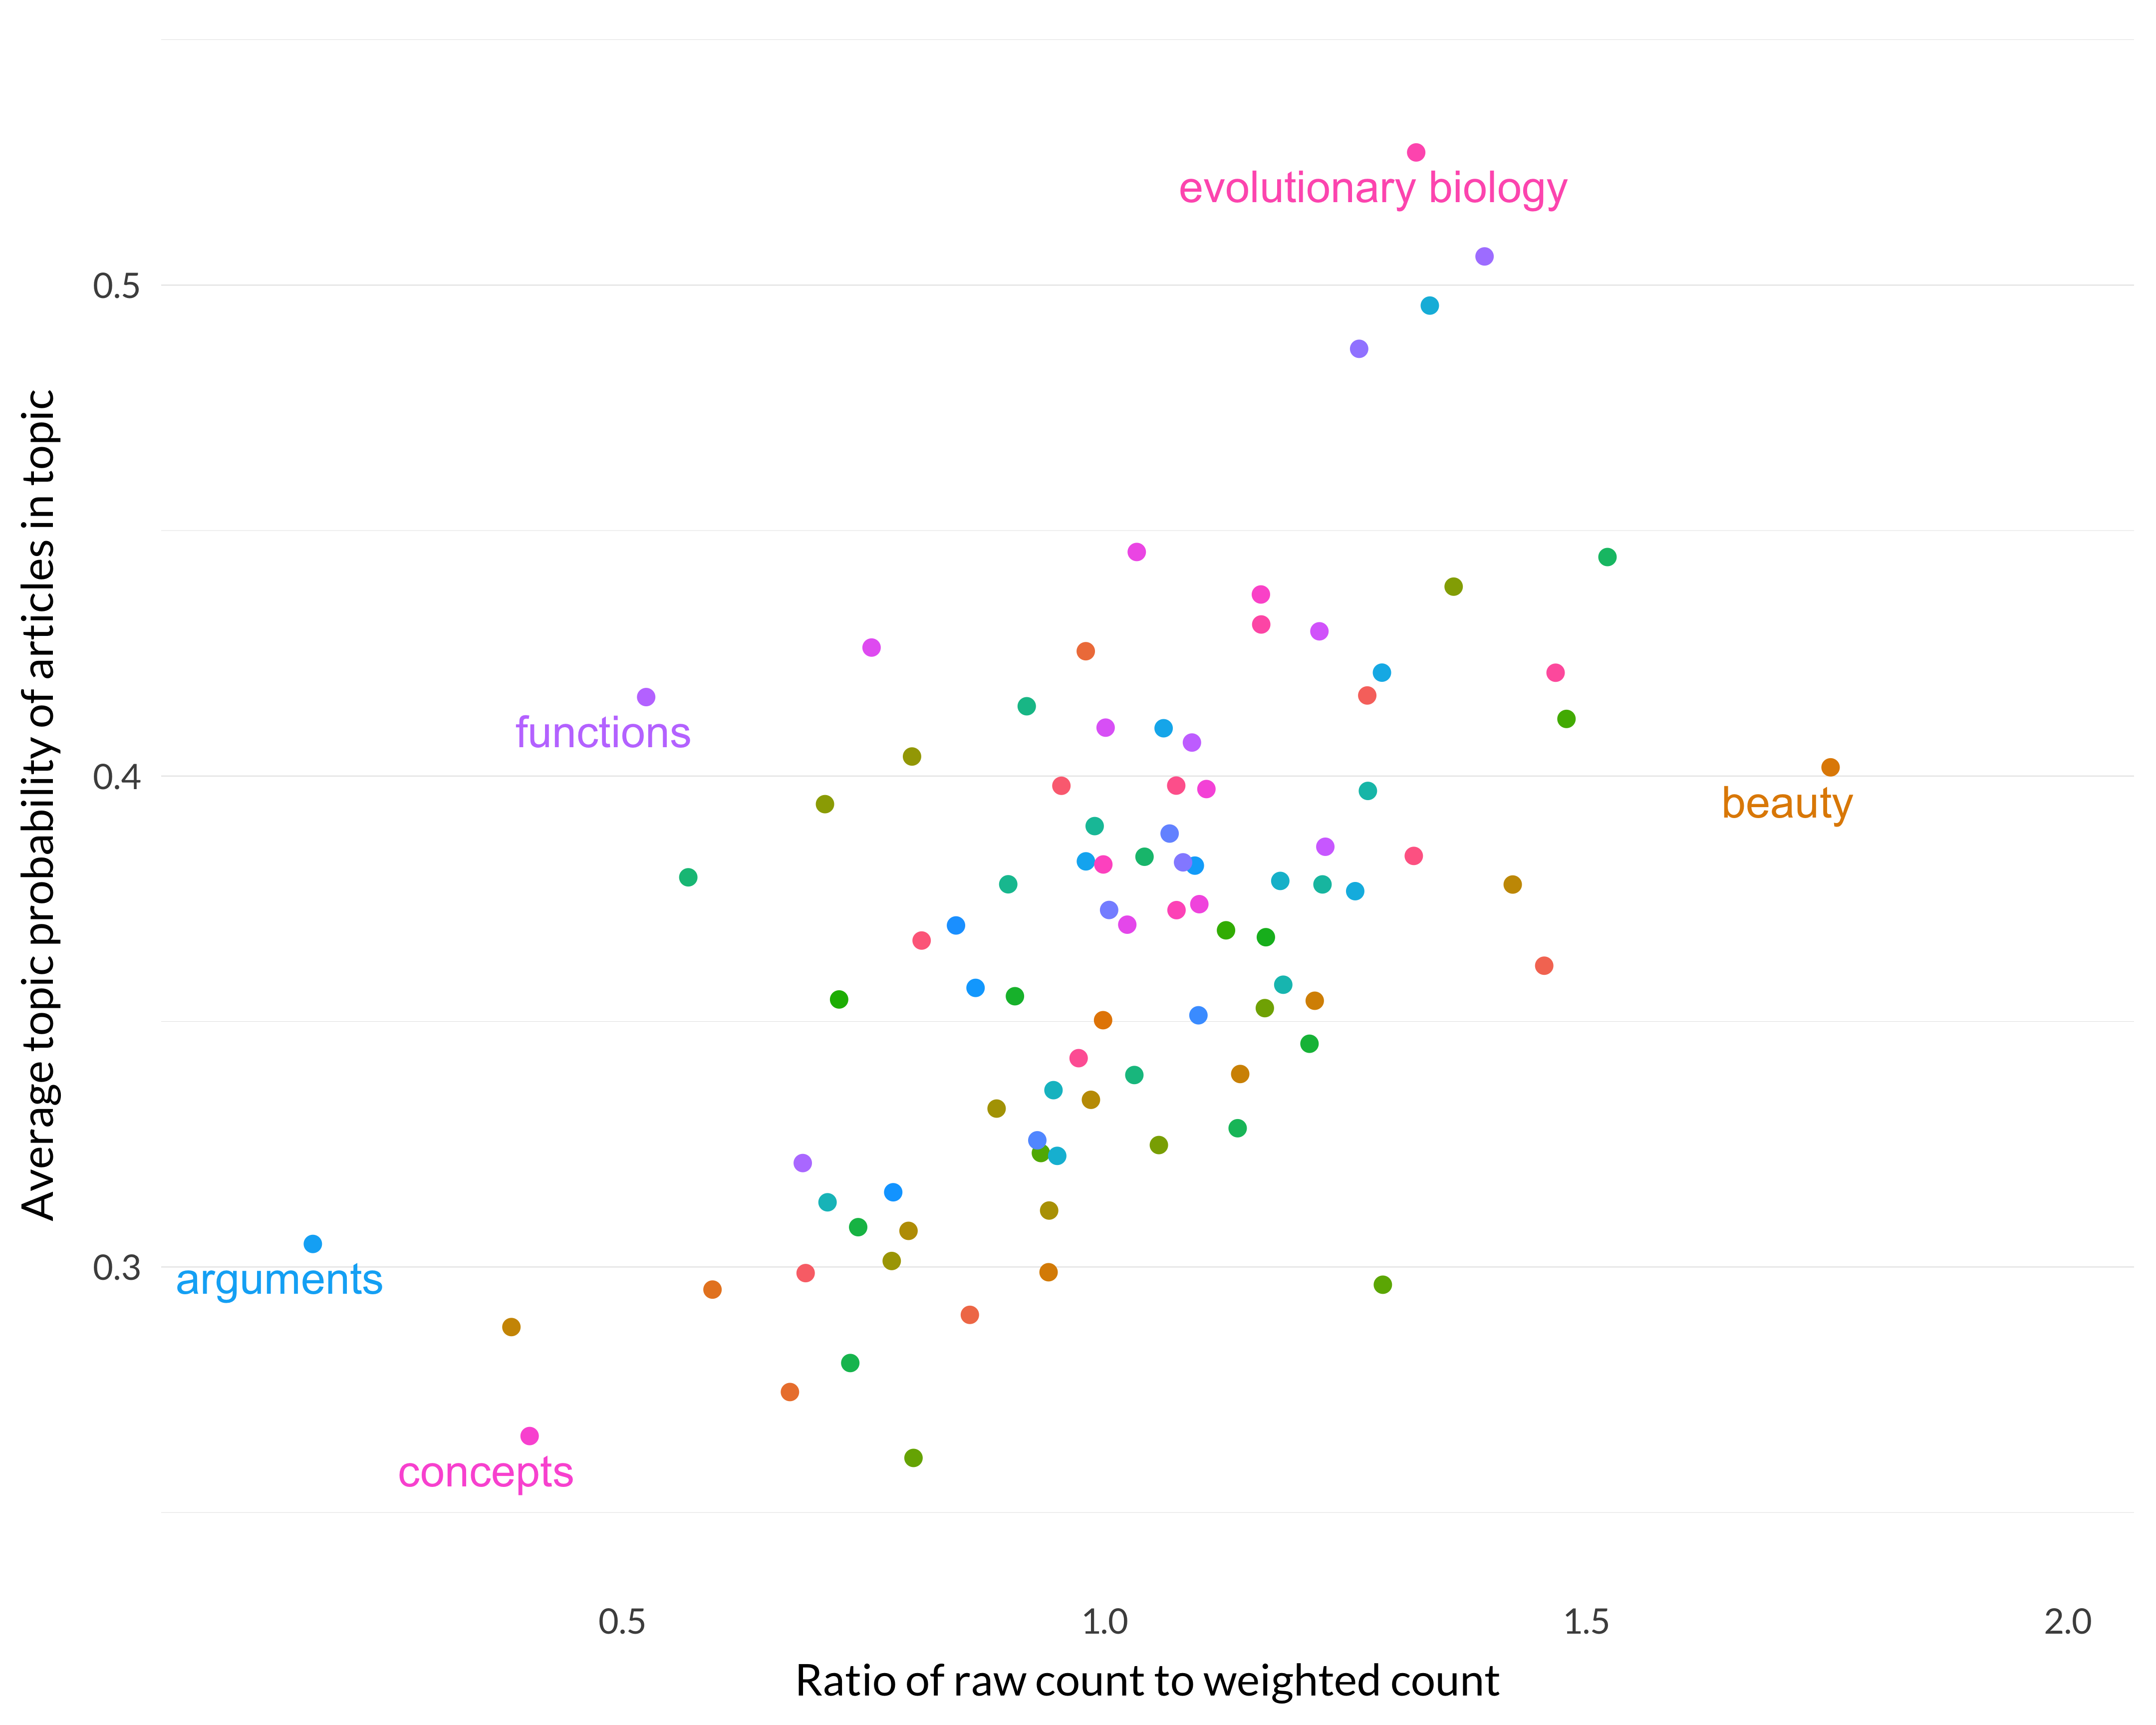 A scatterplot comparing the ratio of raw count to weighted count (r/w) to the average topic probability of articles (p), across topics; i.e., comparing the first and second specialization measures. There is a weak trend.